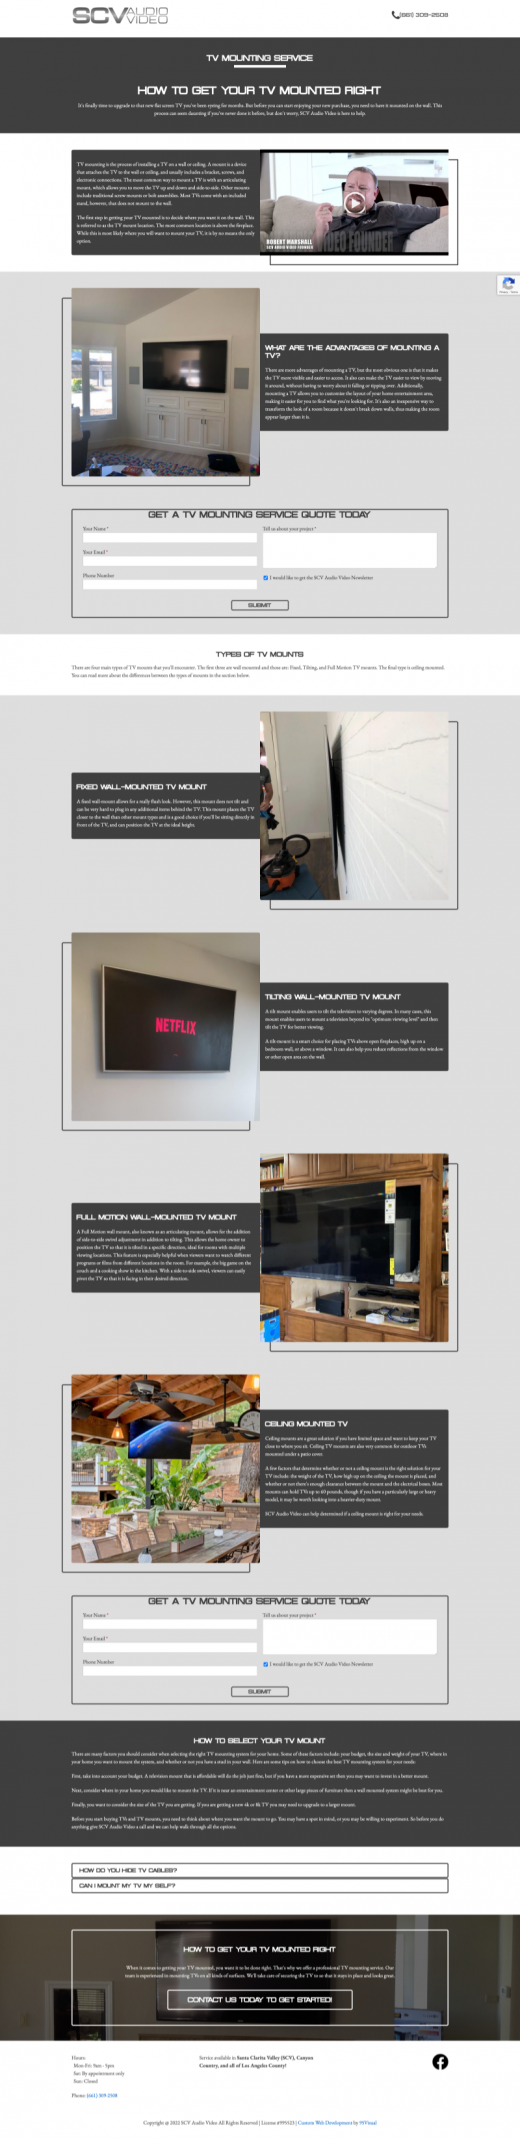 TV Mounting Services Quote page on SCV Audio Video's website.